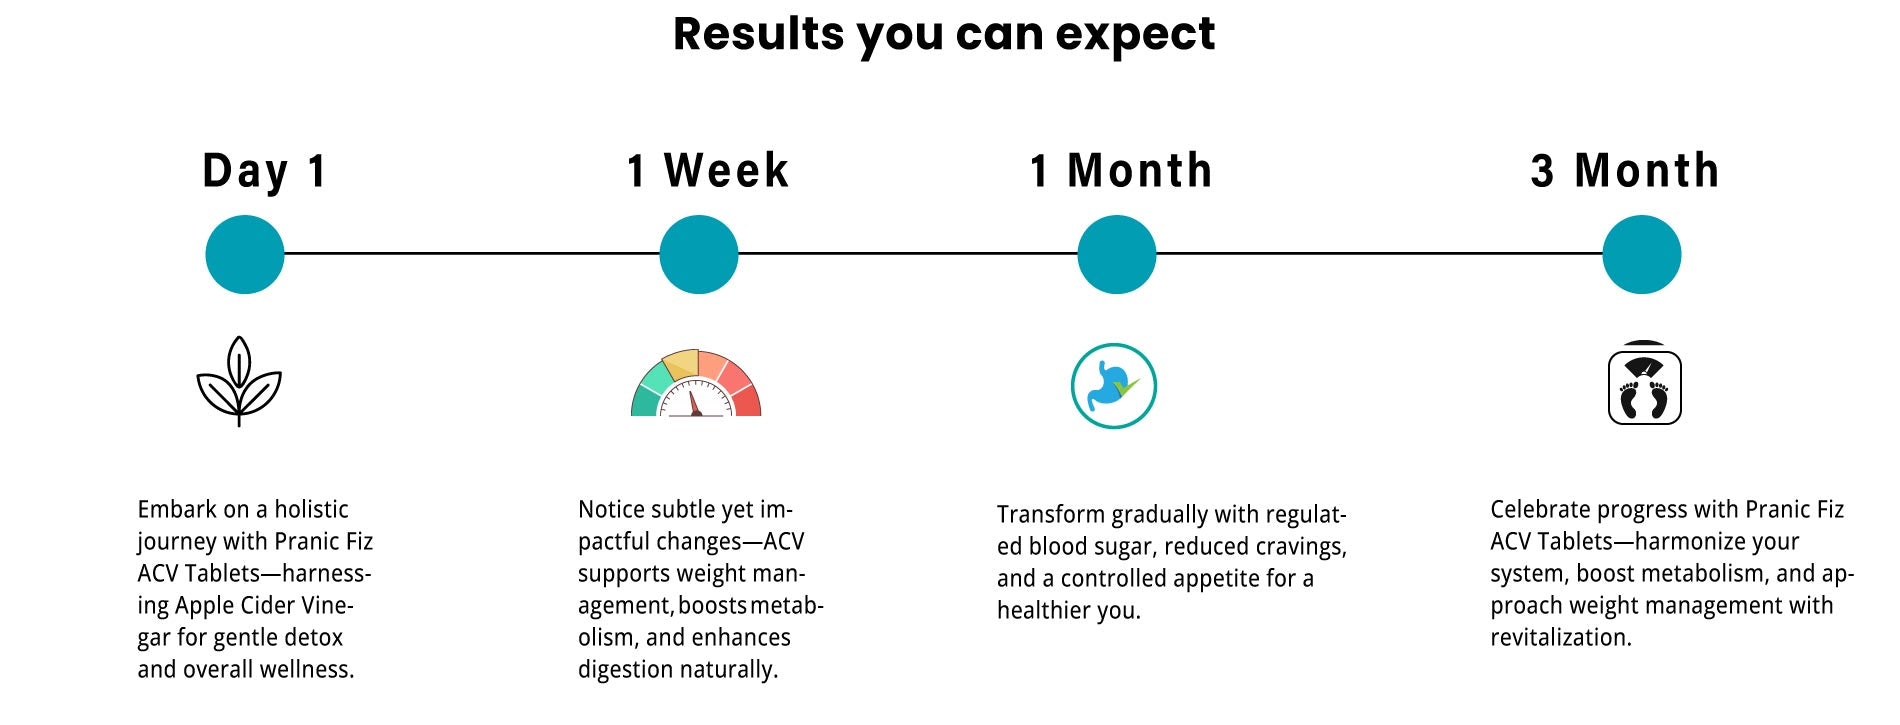 ACV results you can expect